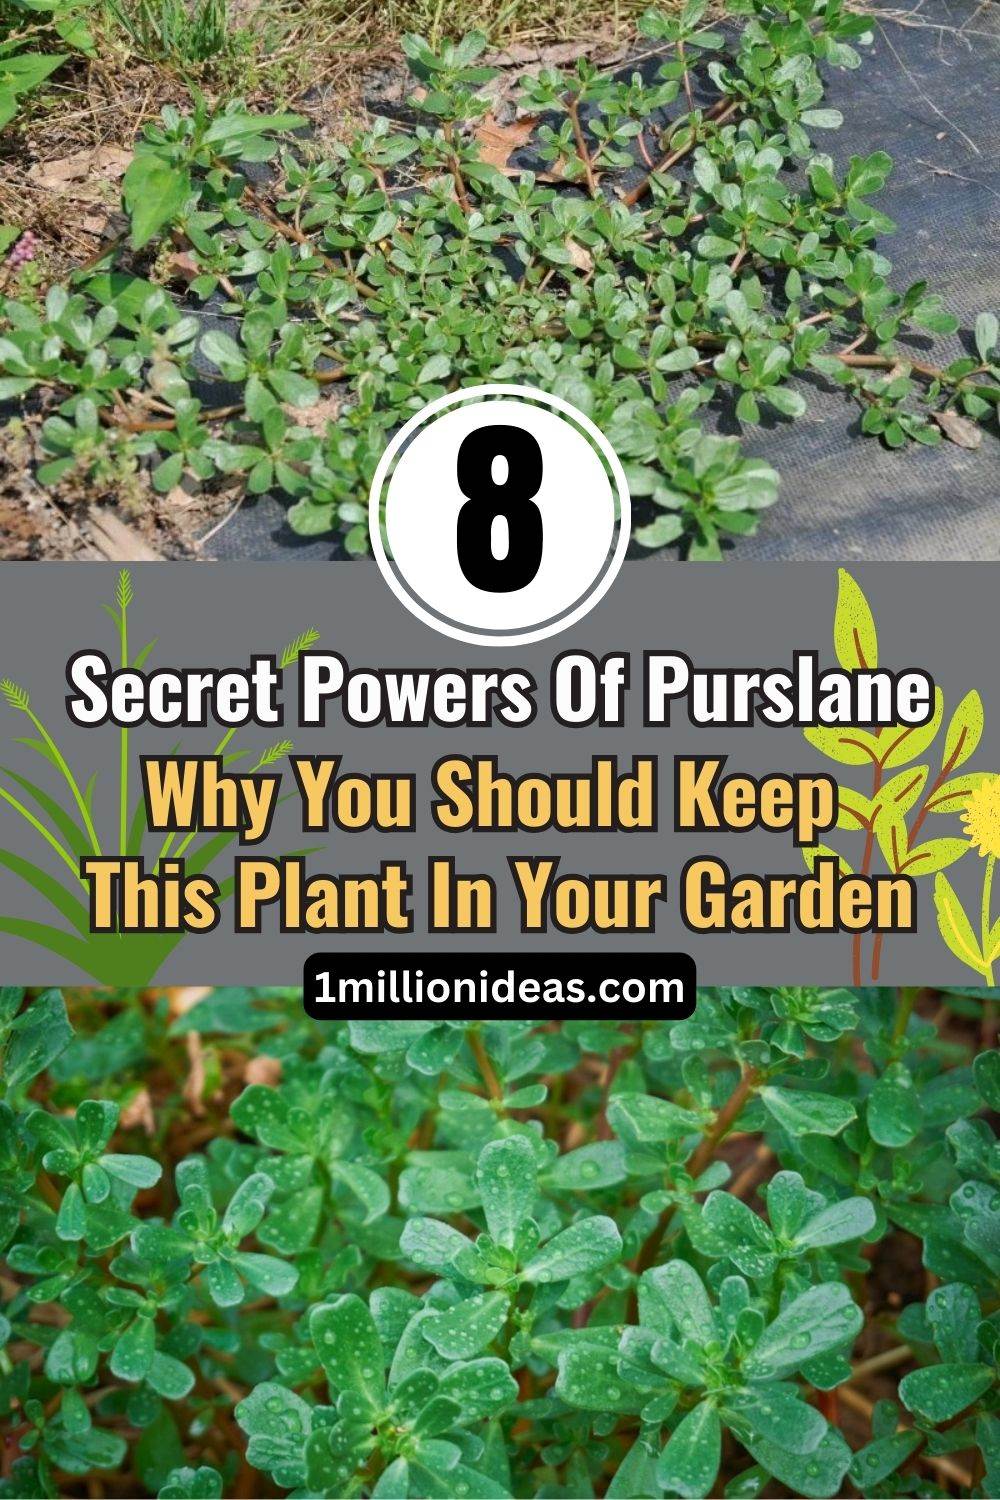 8 Secret Powers Of Purslane: Why You Should Keep This Plant In Your Garden - 59